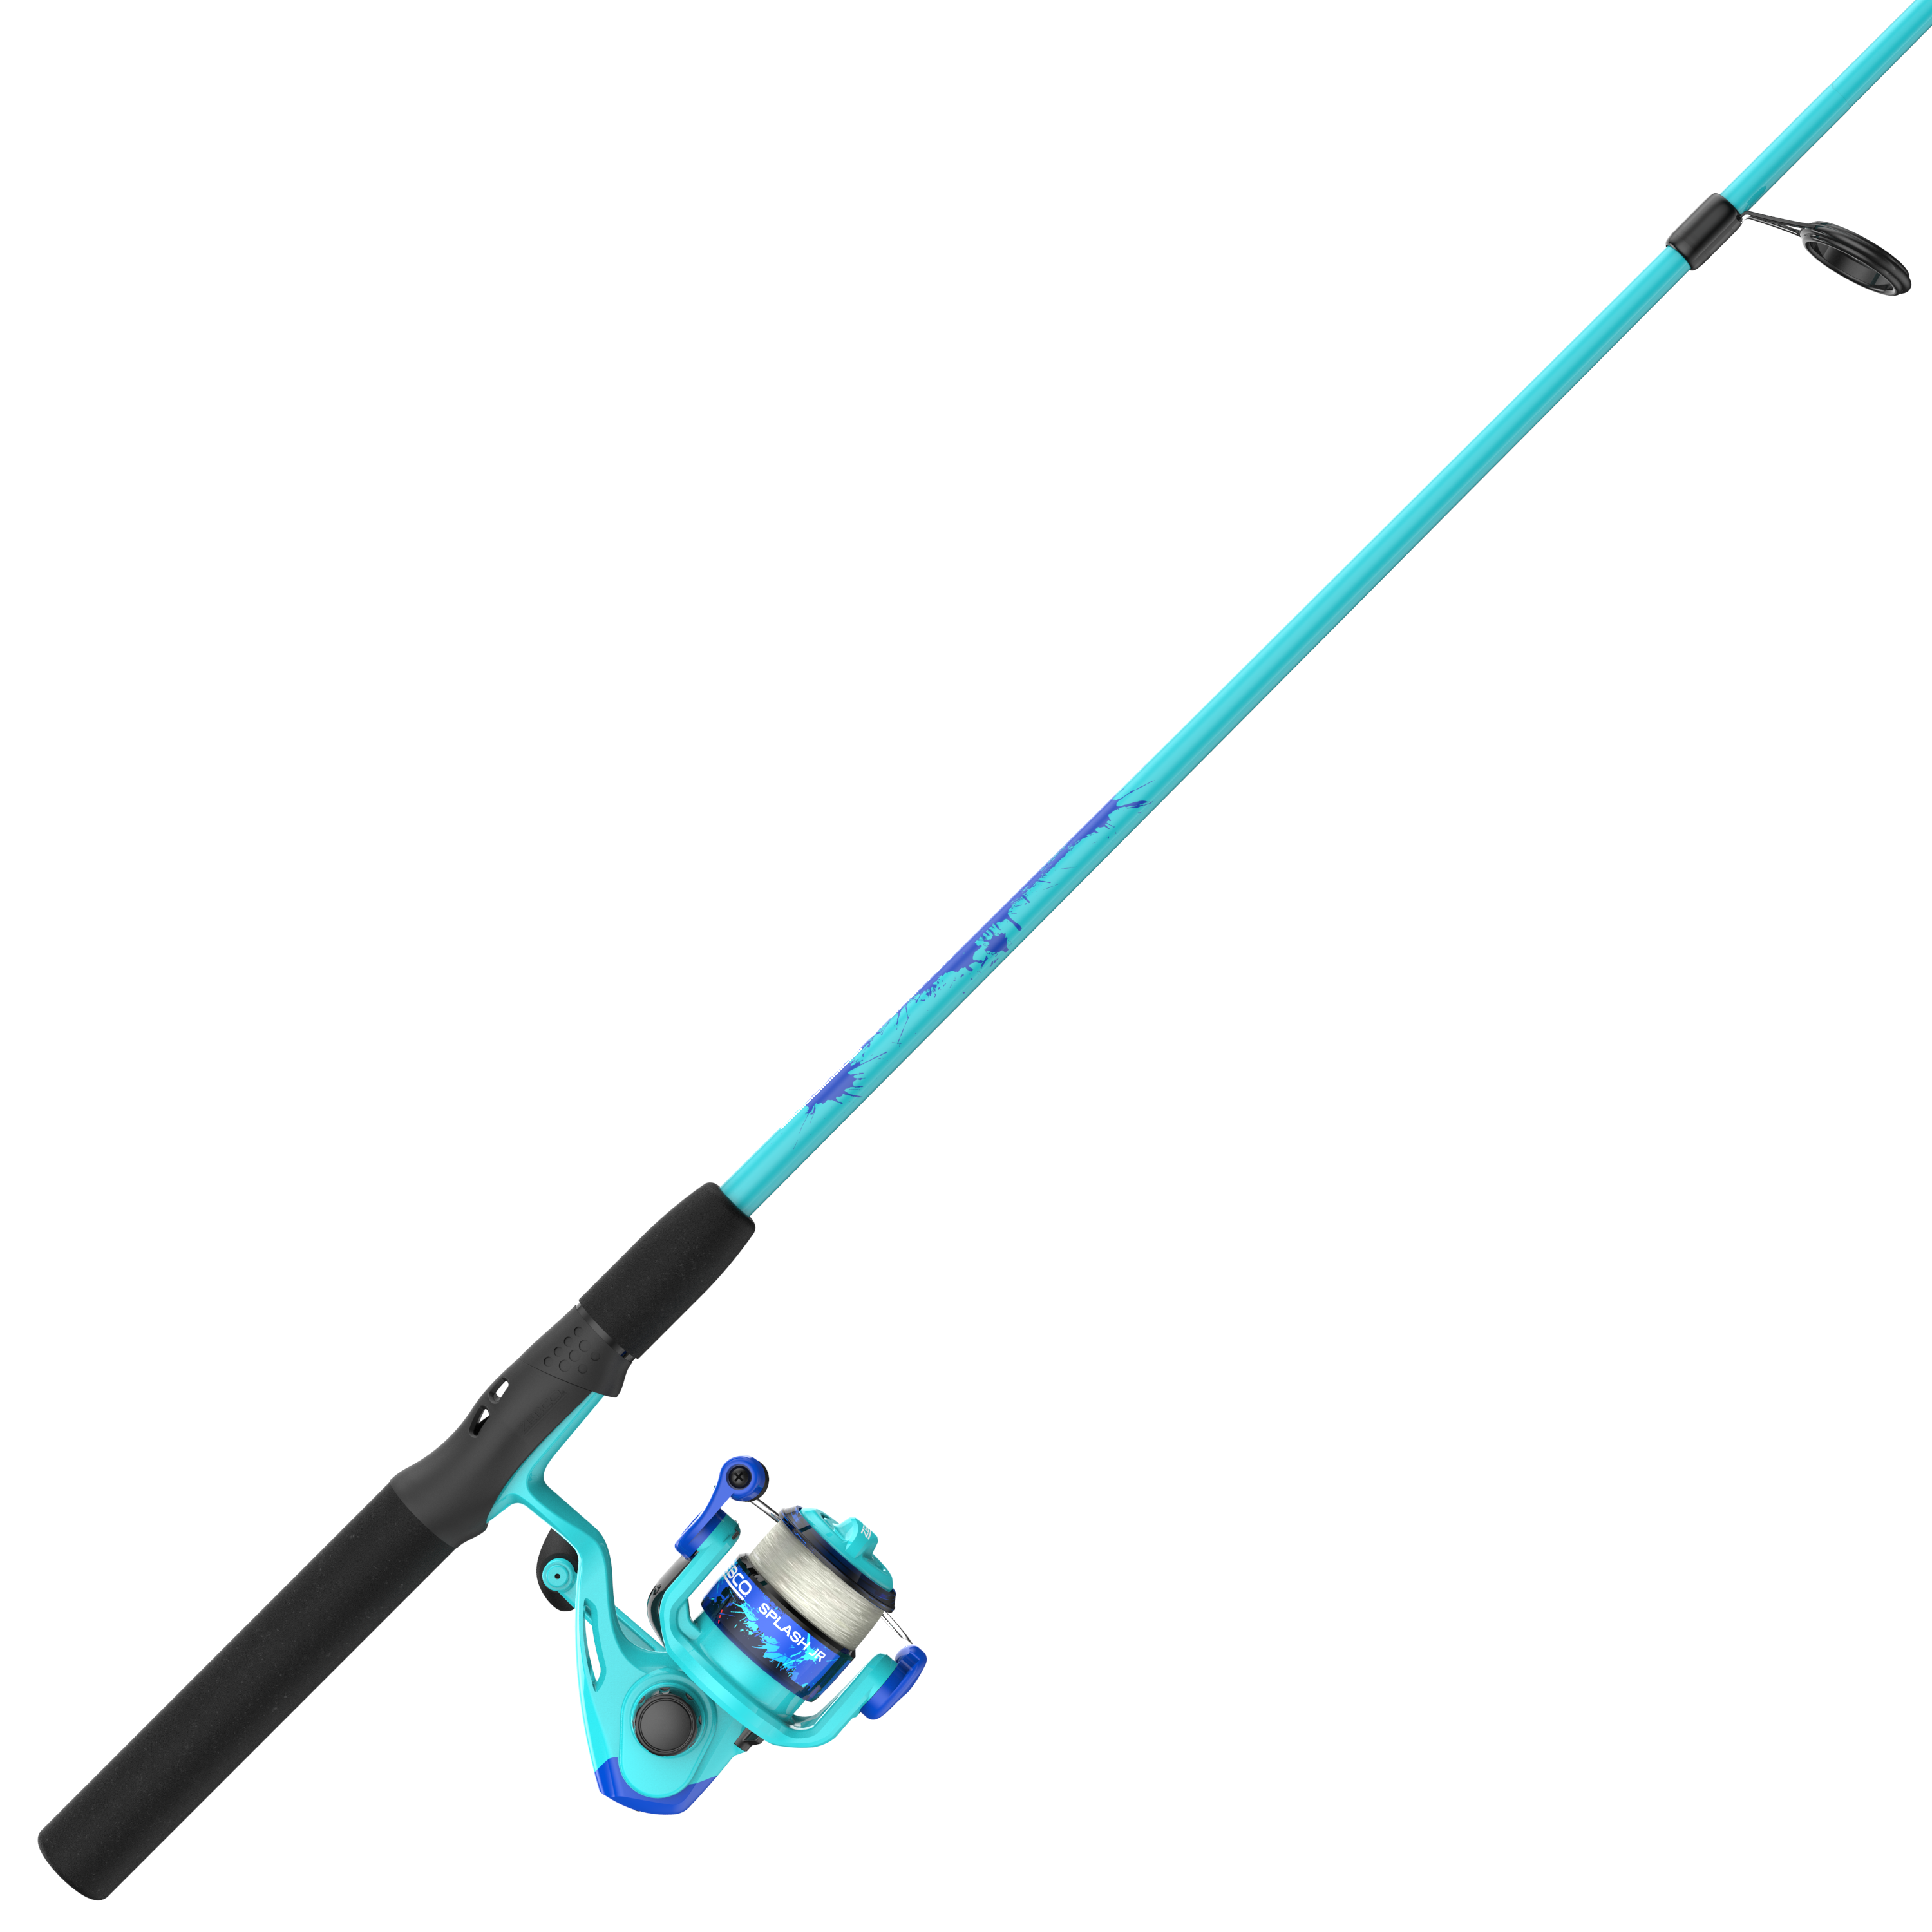 Zebco 33 Rhino Tough Spincast Reel and 2-Piece Fishing Rod Combo, Durable  E-Glass Rod with ComfortGrip Handle, QuickSet Anti-Reverse Fishing Reel  with